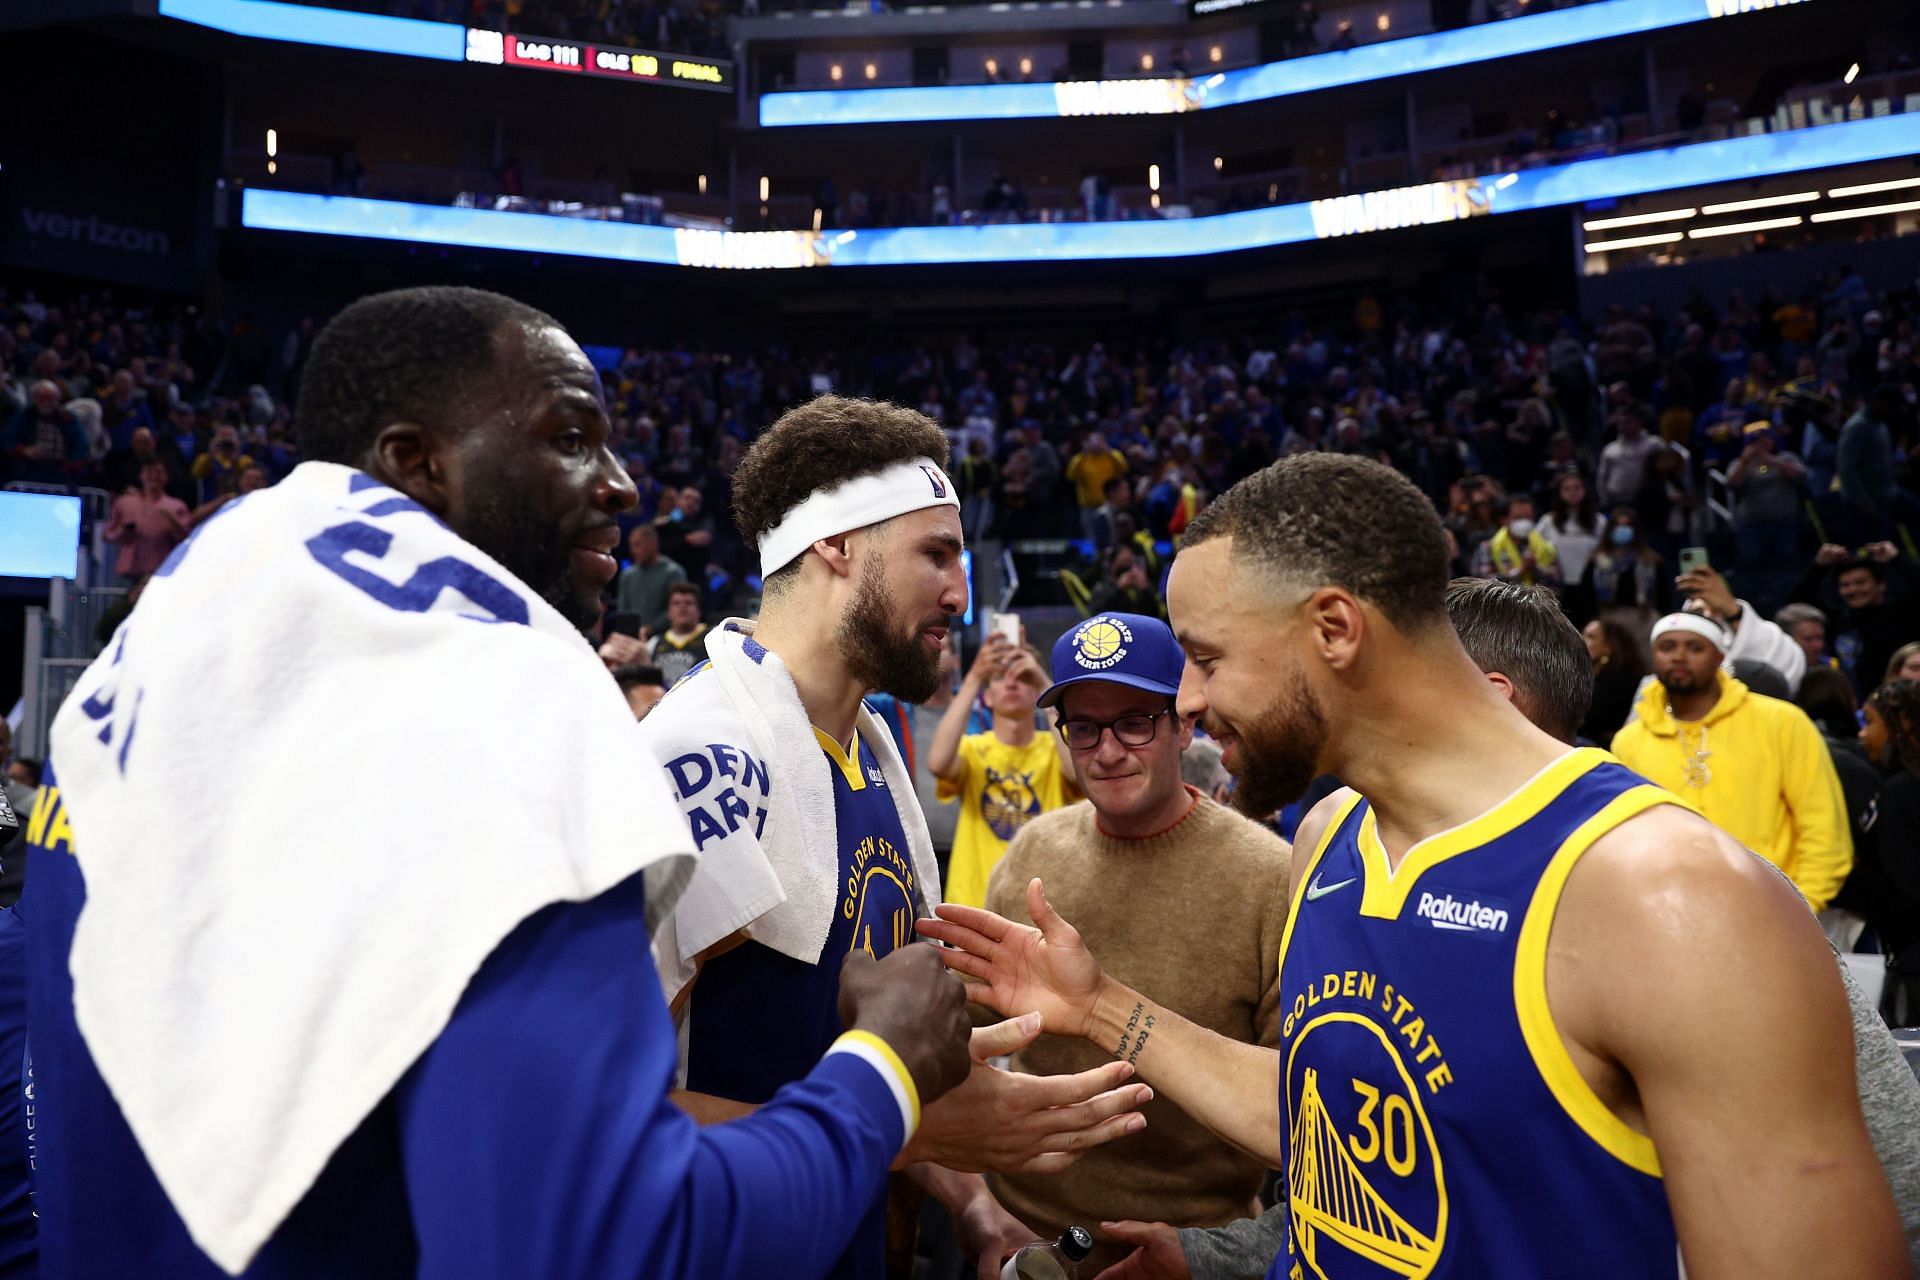 The Golden State Warriors suffered a debilitating loss against the Memphis Grizzlies in Game 5